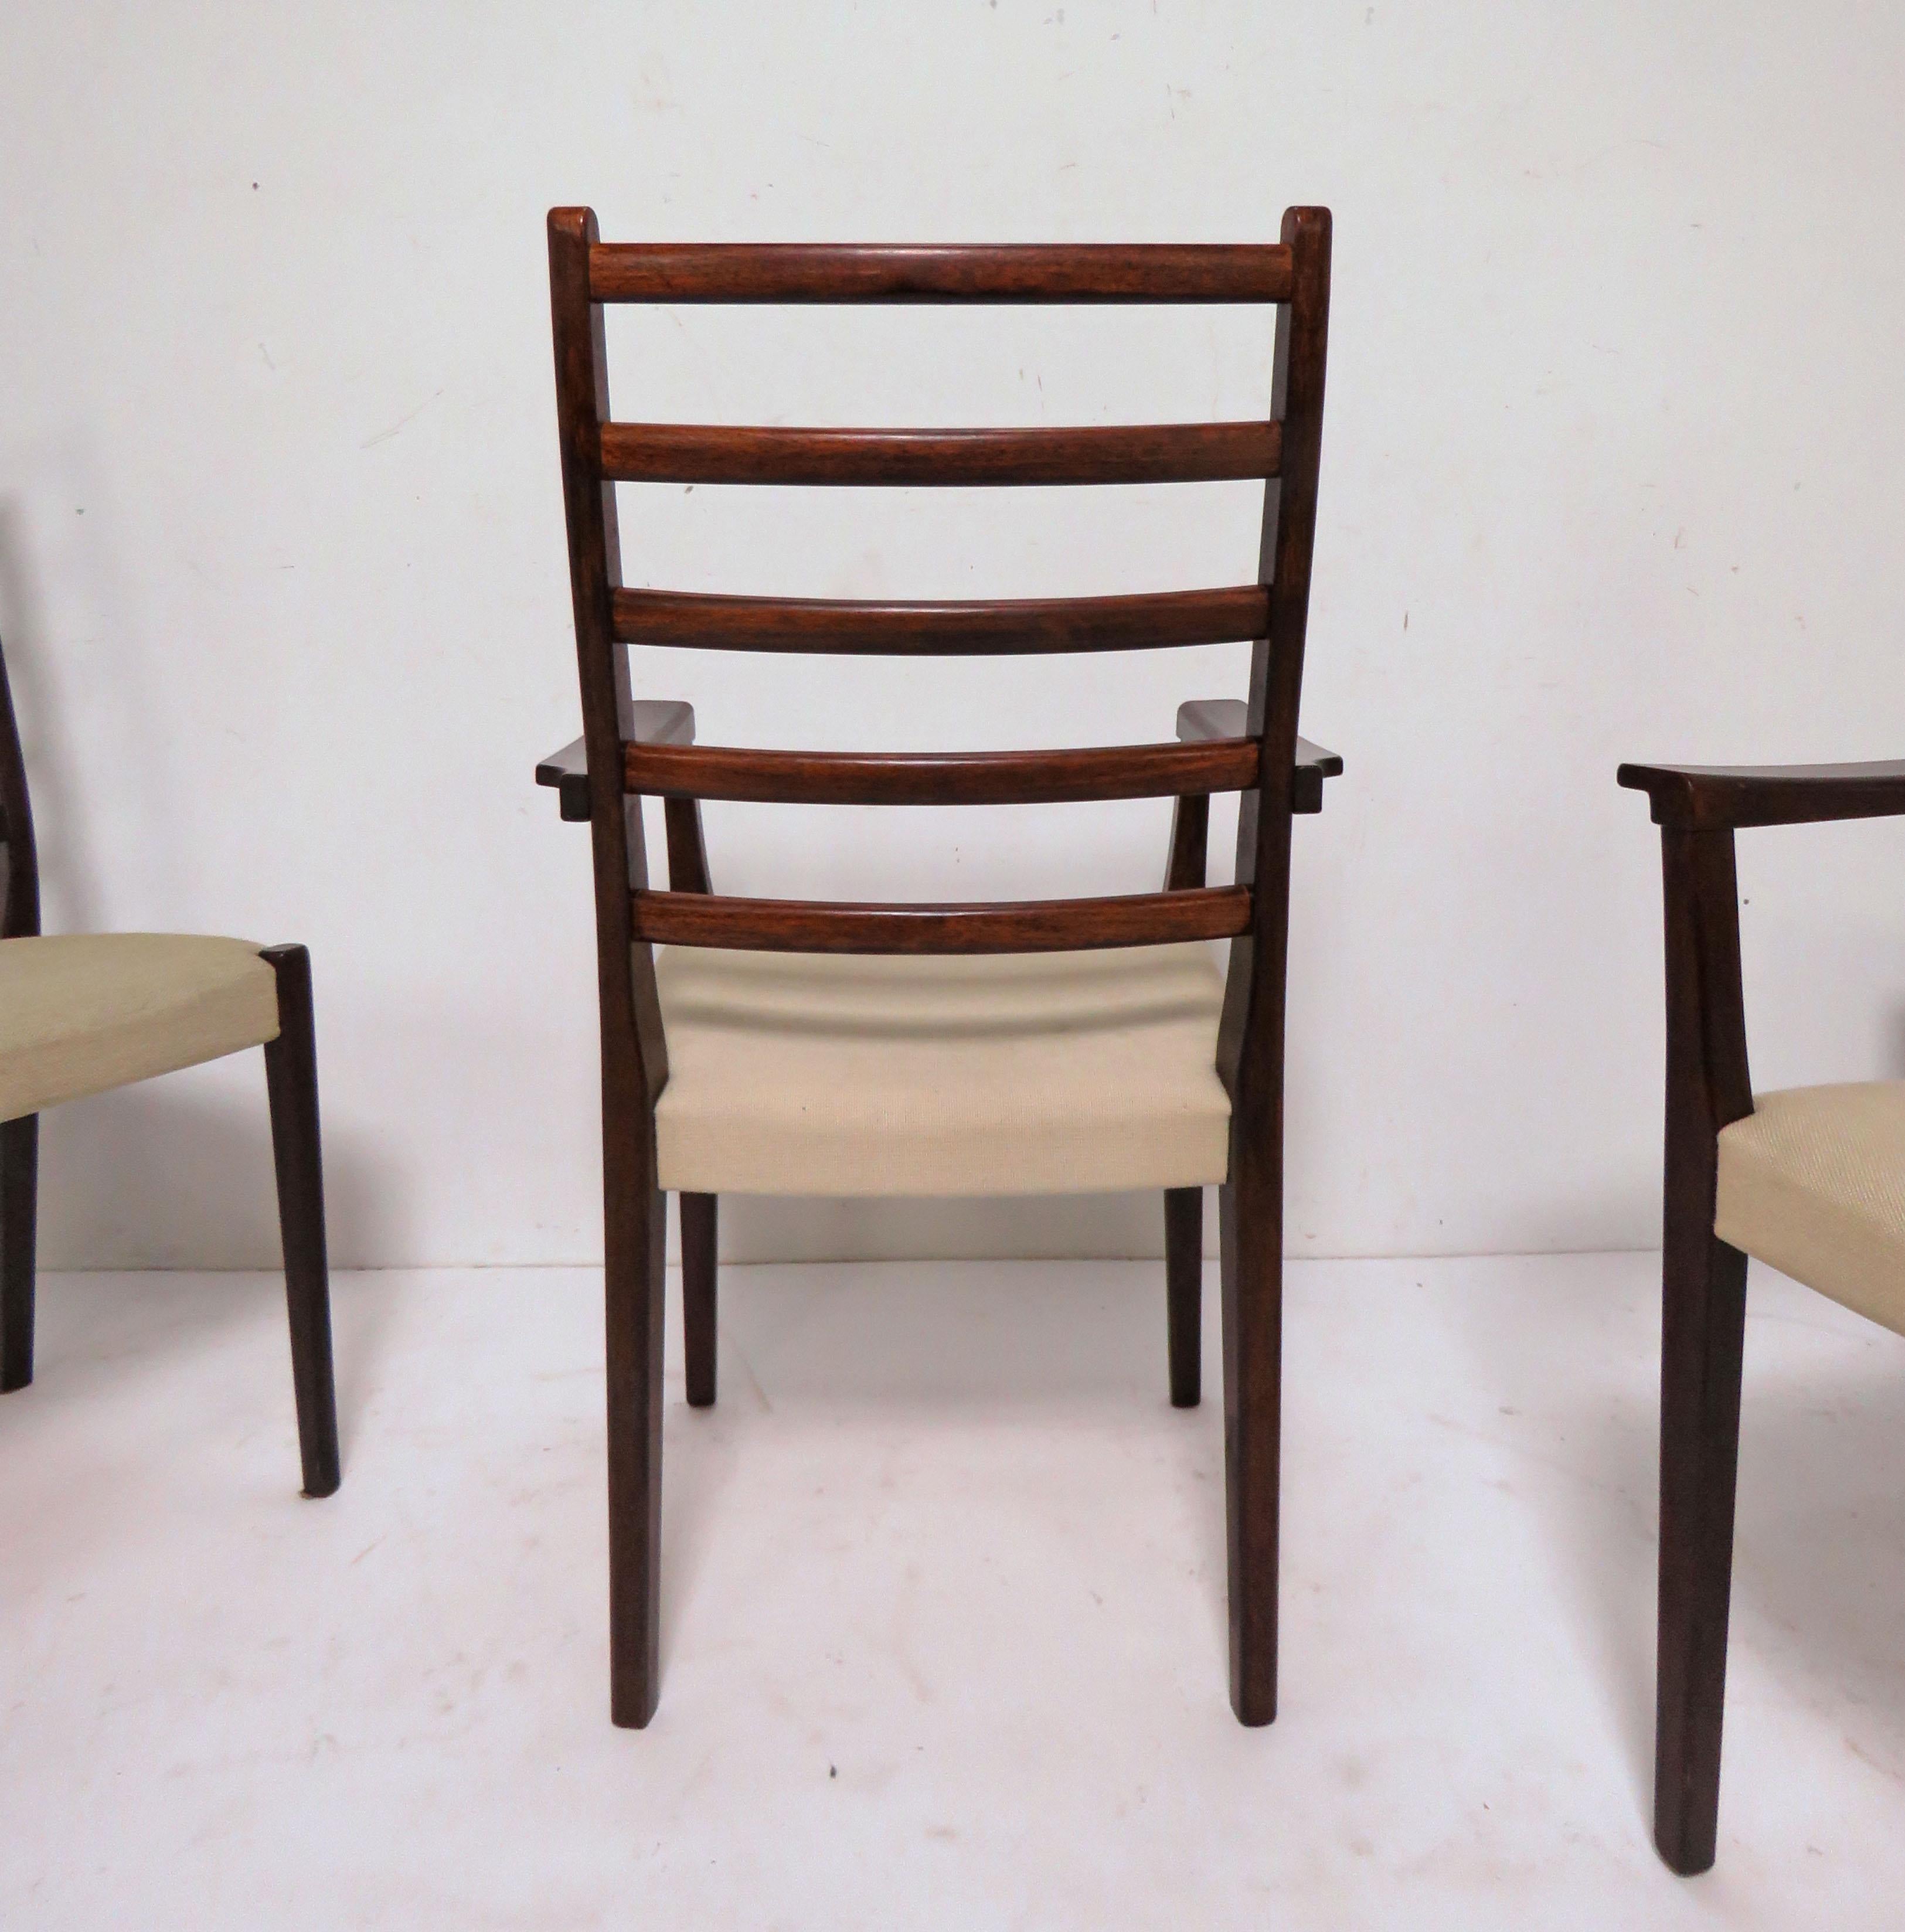 Upholstery Set of Six Danish Modern Rosewood Ladder Back Dining Chairs by Svegards, Sweden